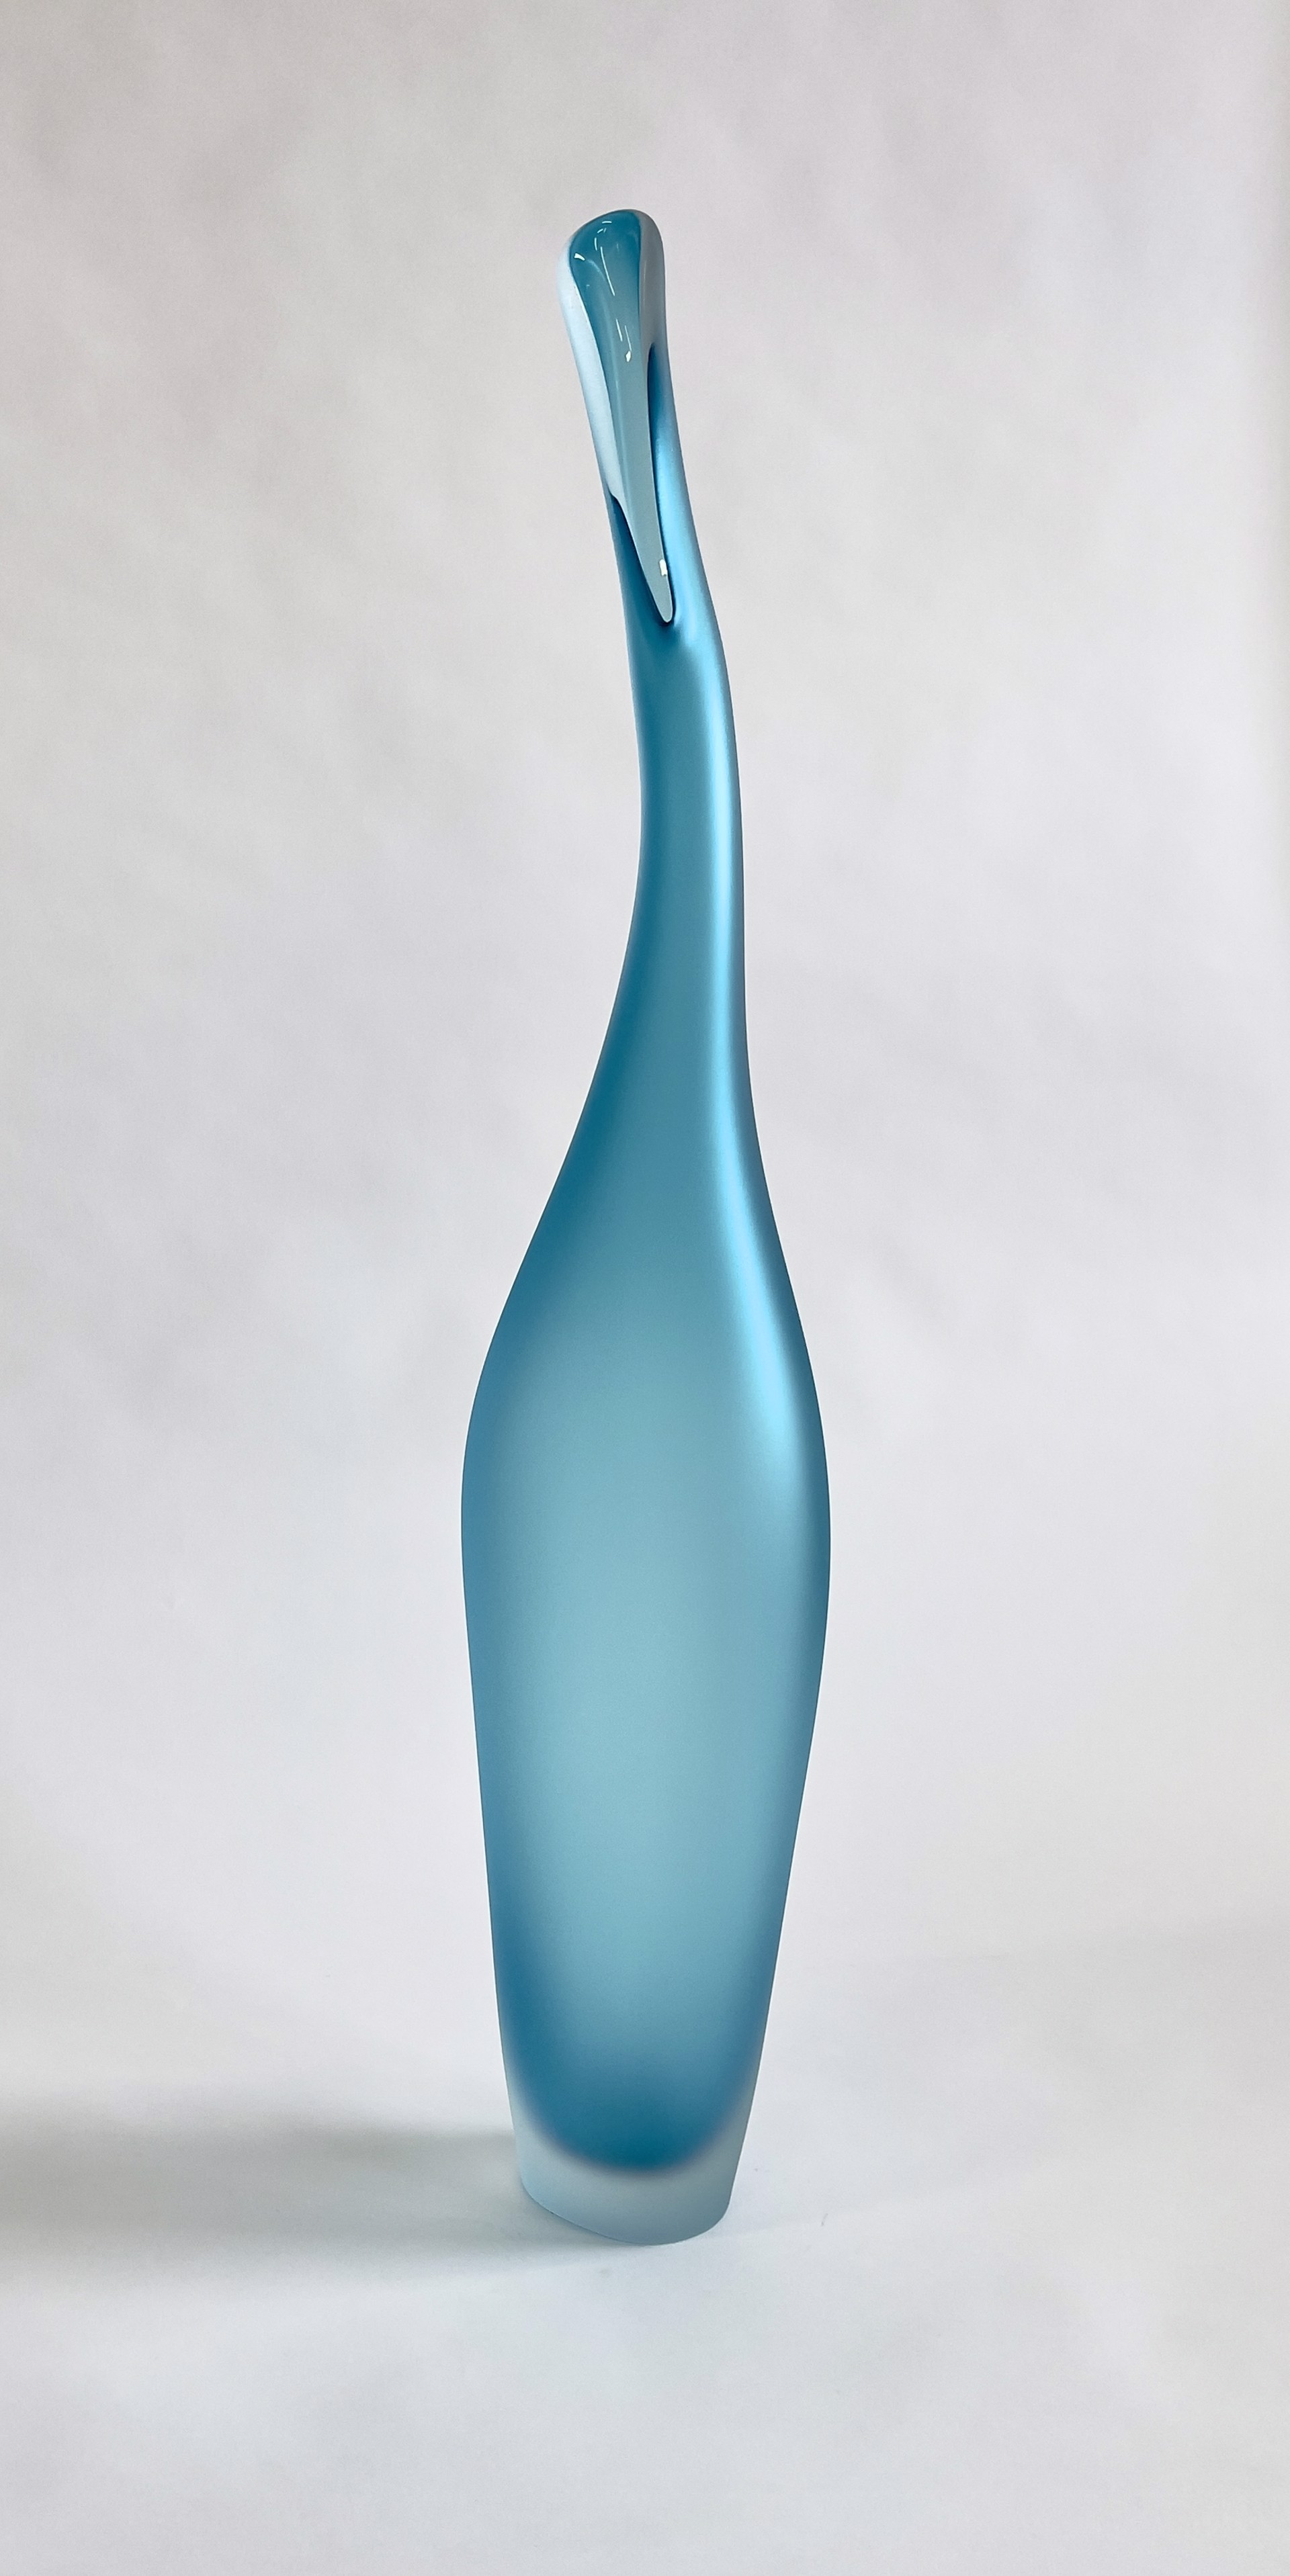 Copper Blue Lima by The Goodman Studio is a tall, slender glass sculpture in a shade of light blue. The sculpture is sandblasted but has hints of transparency.